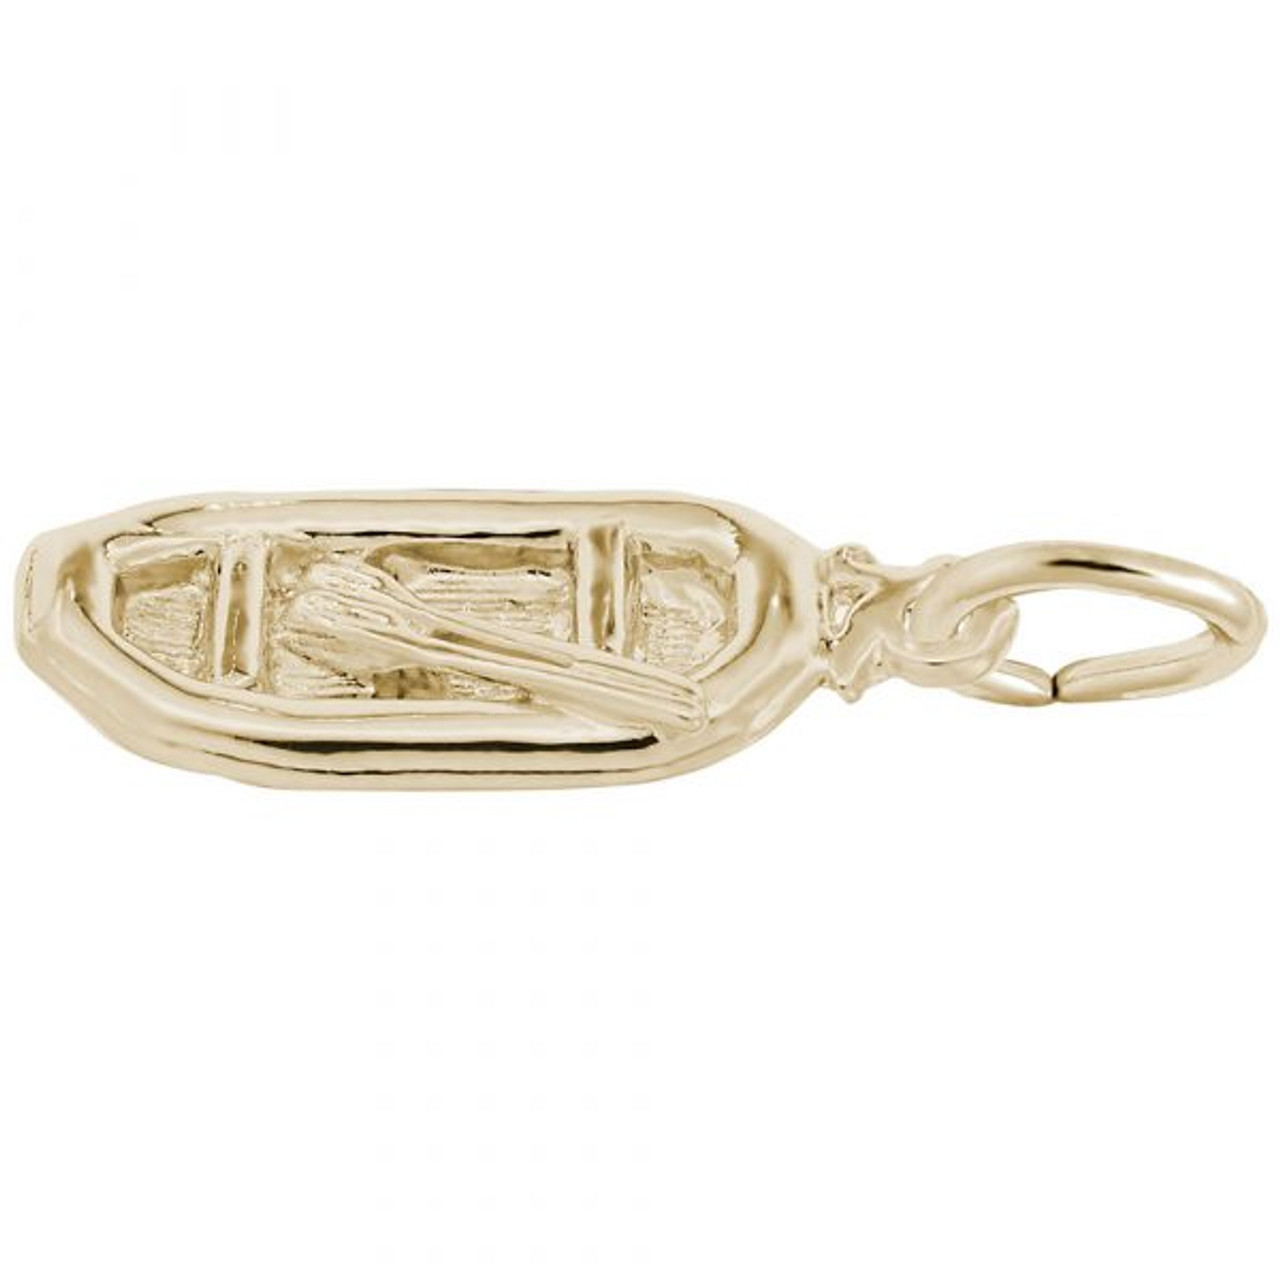 White Water Raft Charm - Gold Plate, 10k Gold, 14k Gold